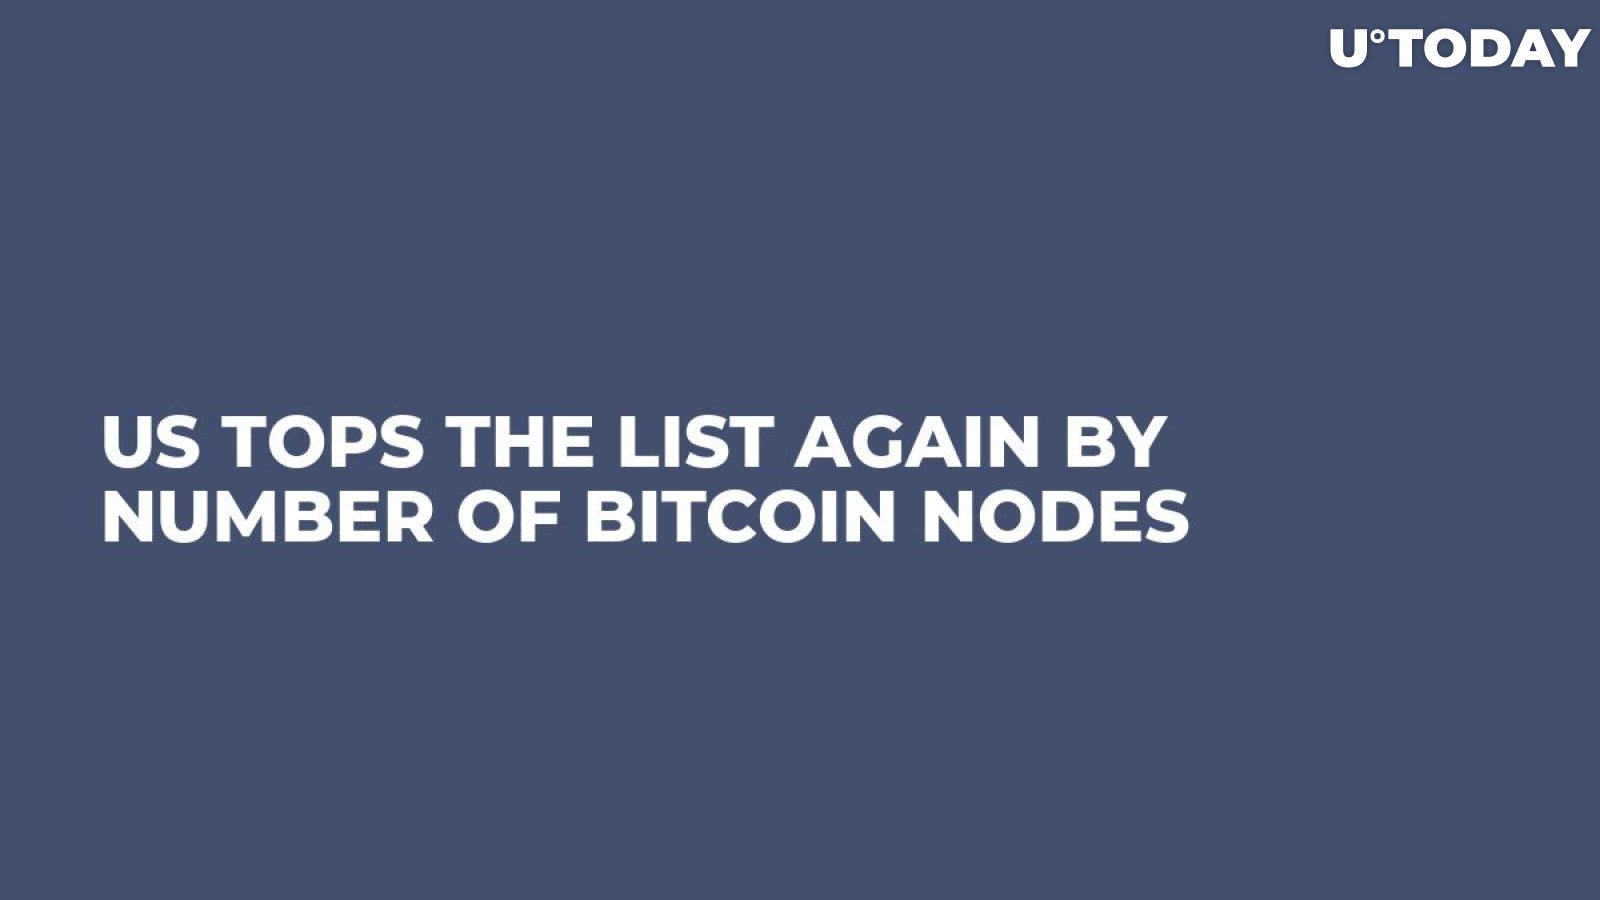 US Tops the List Again by Number of Bitcoin Nodes